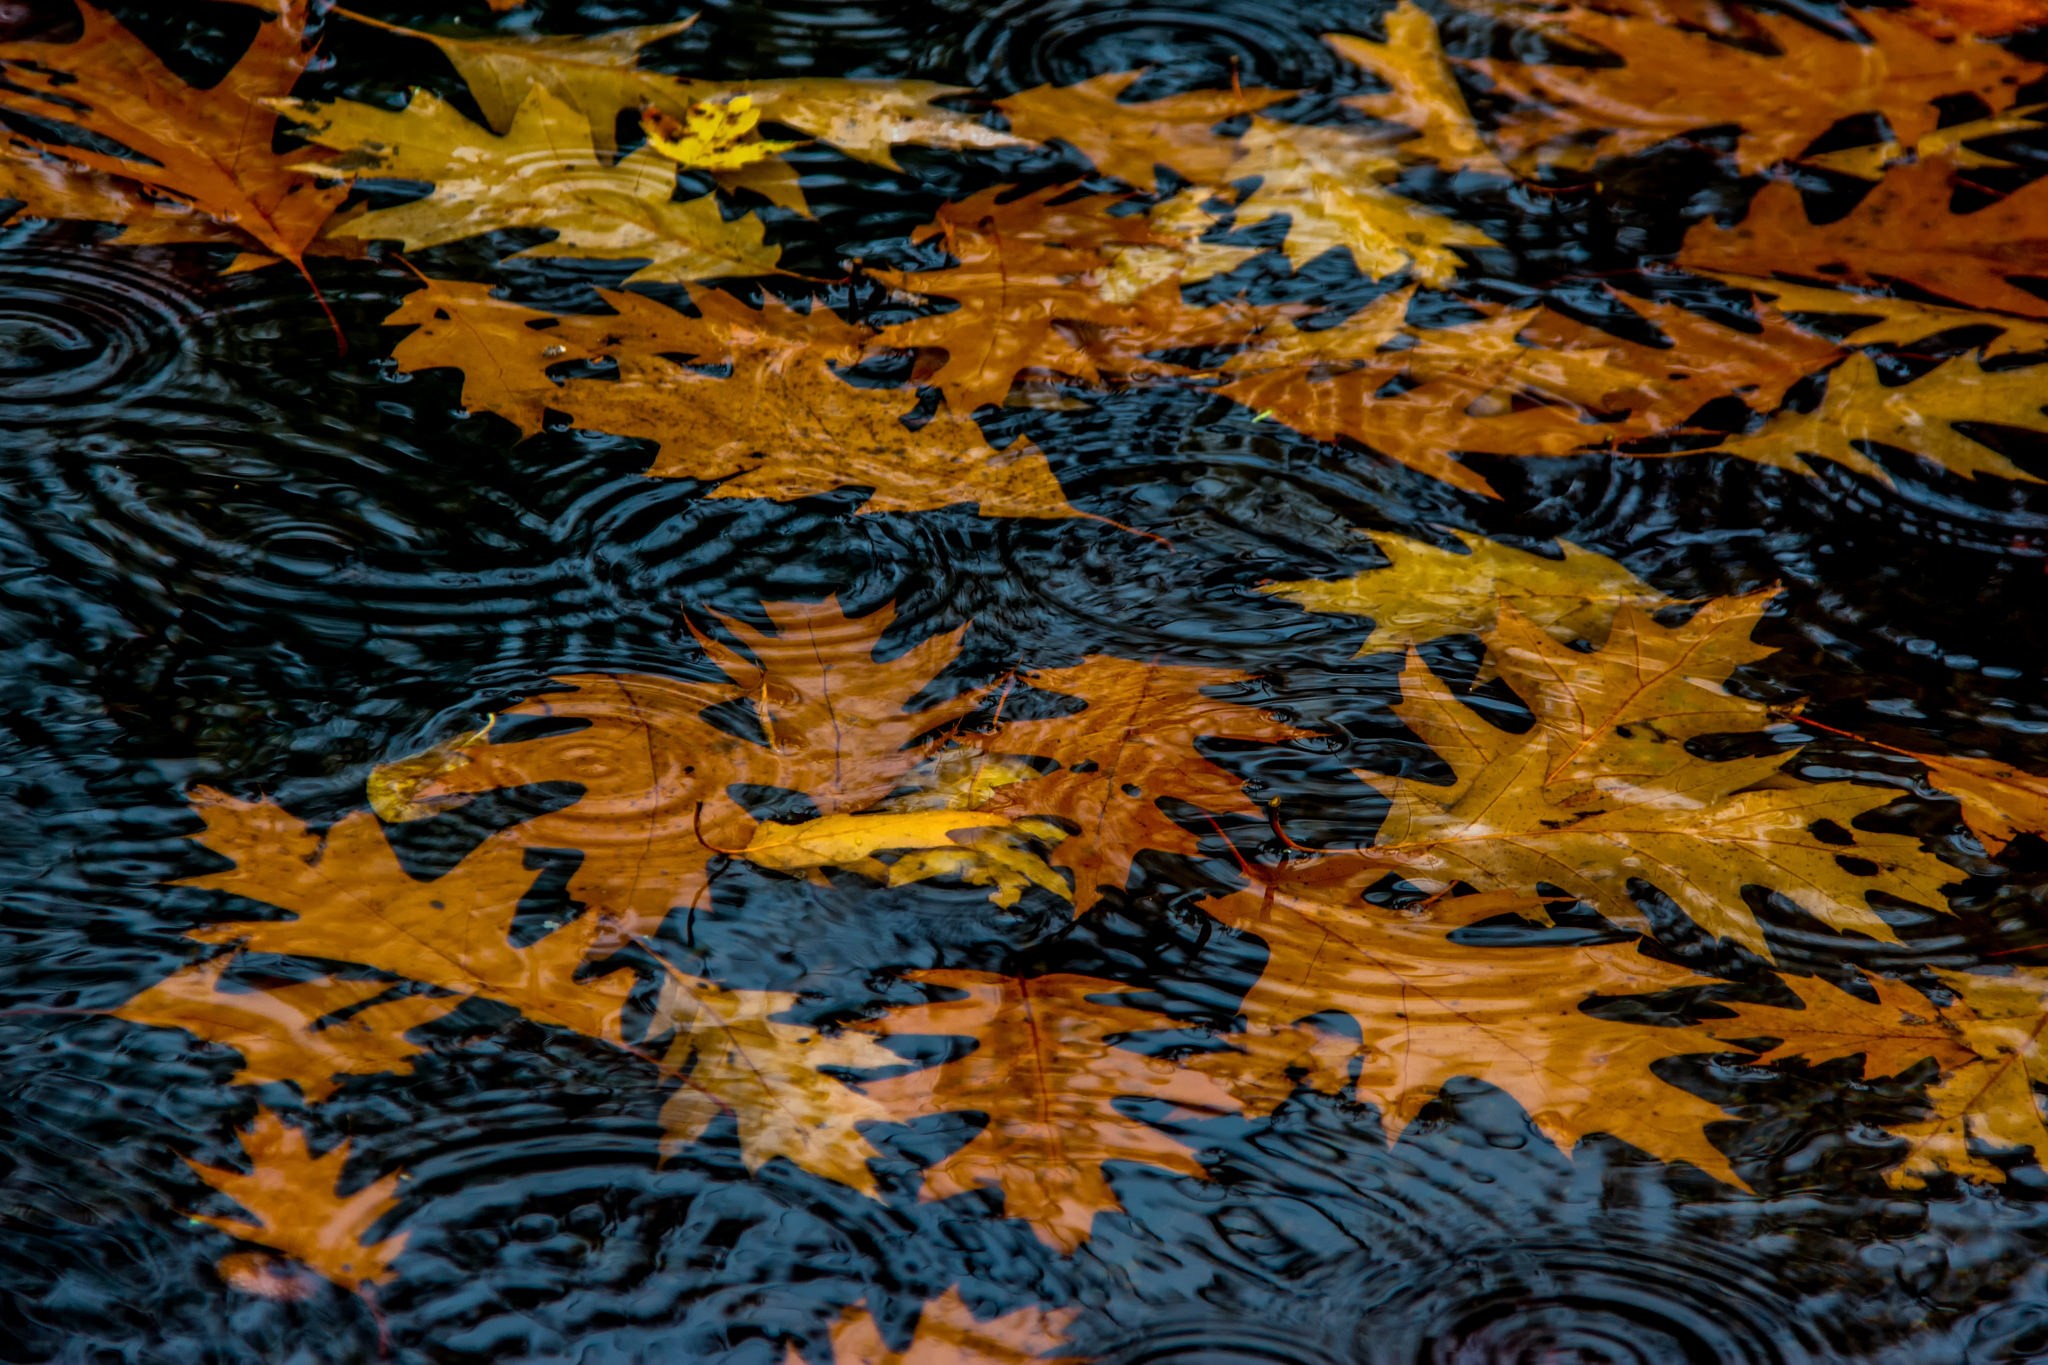 General 2048x1365 fallen leaves pond waves fall leaves plants outdoors